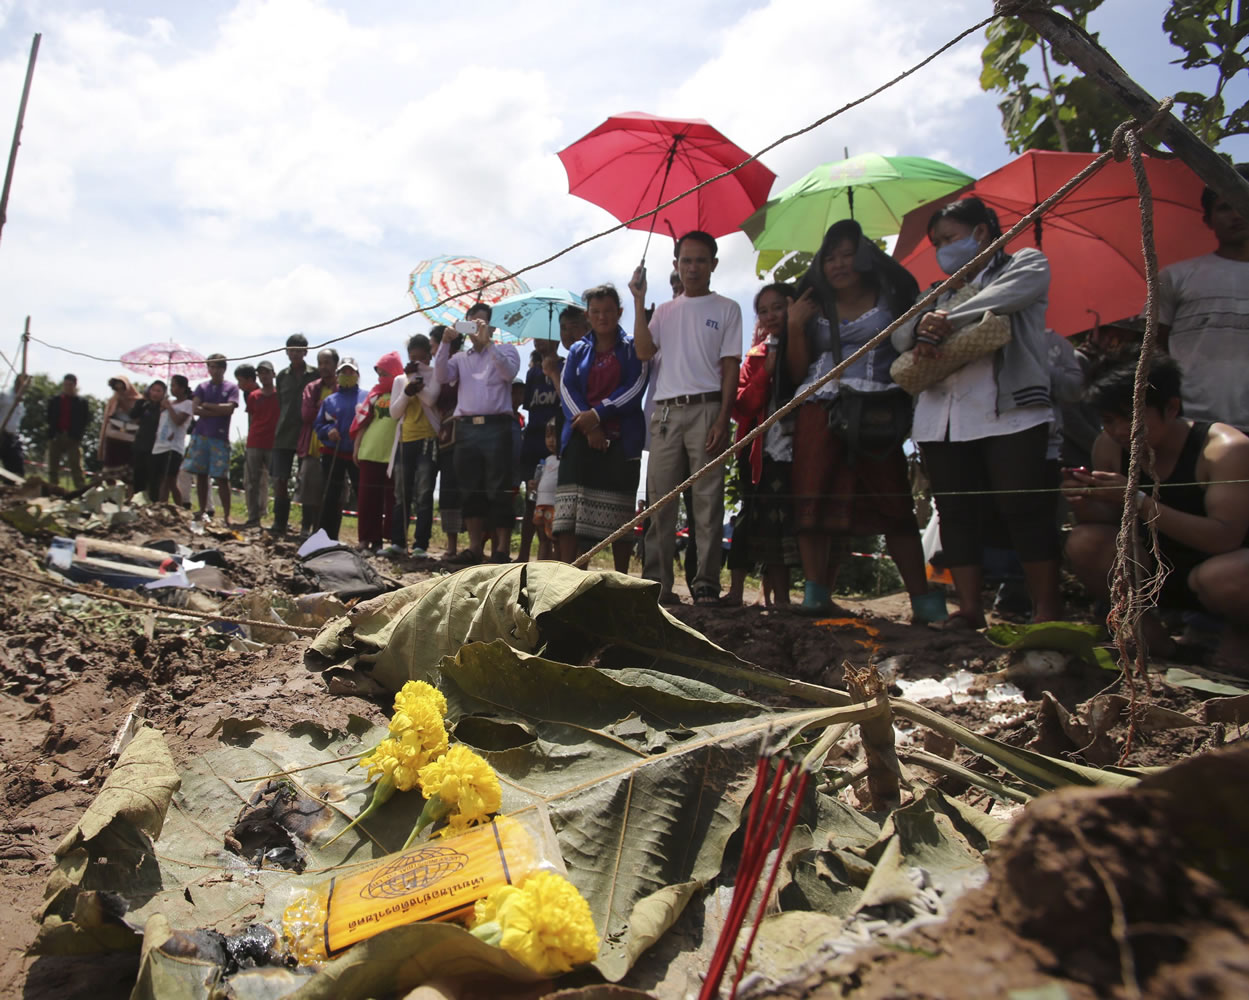 People look at the debris of a Lao Airlines turboprop plane, which crashed in Pakse, Laos, on Thursday.